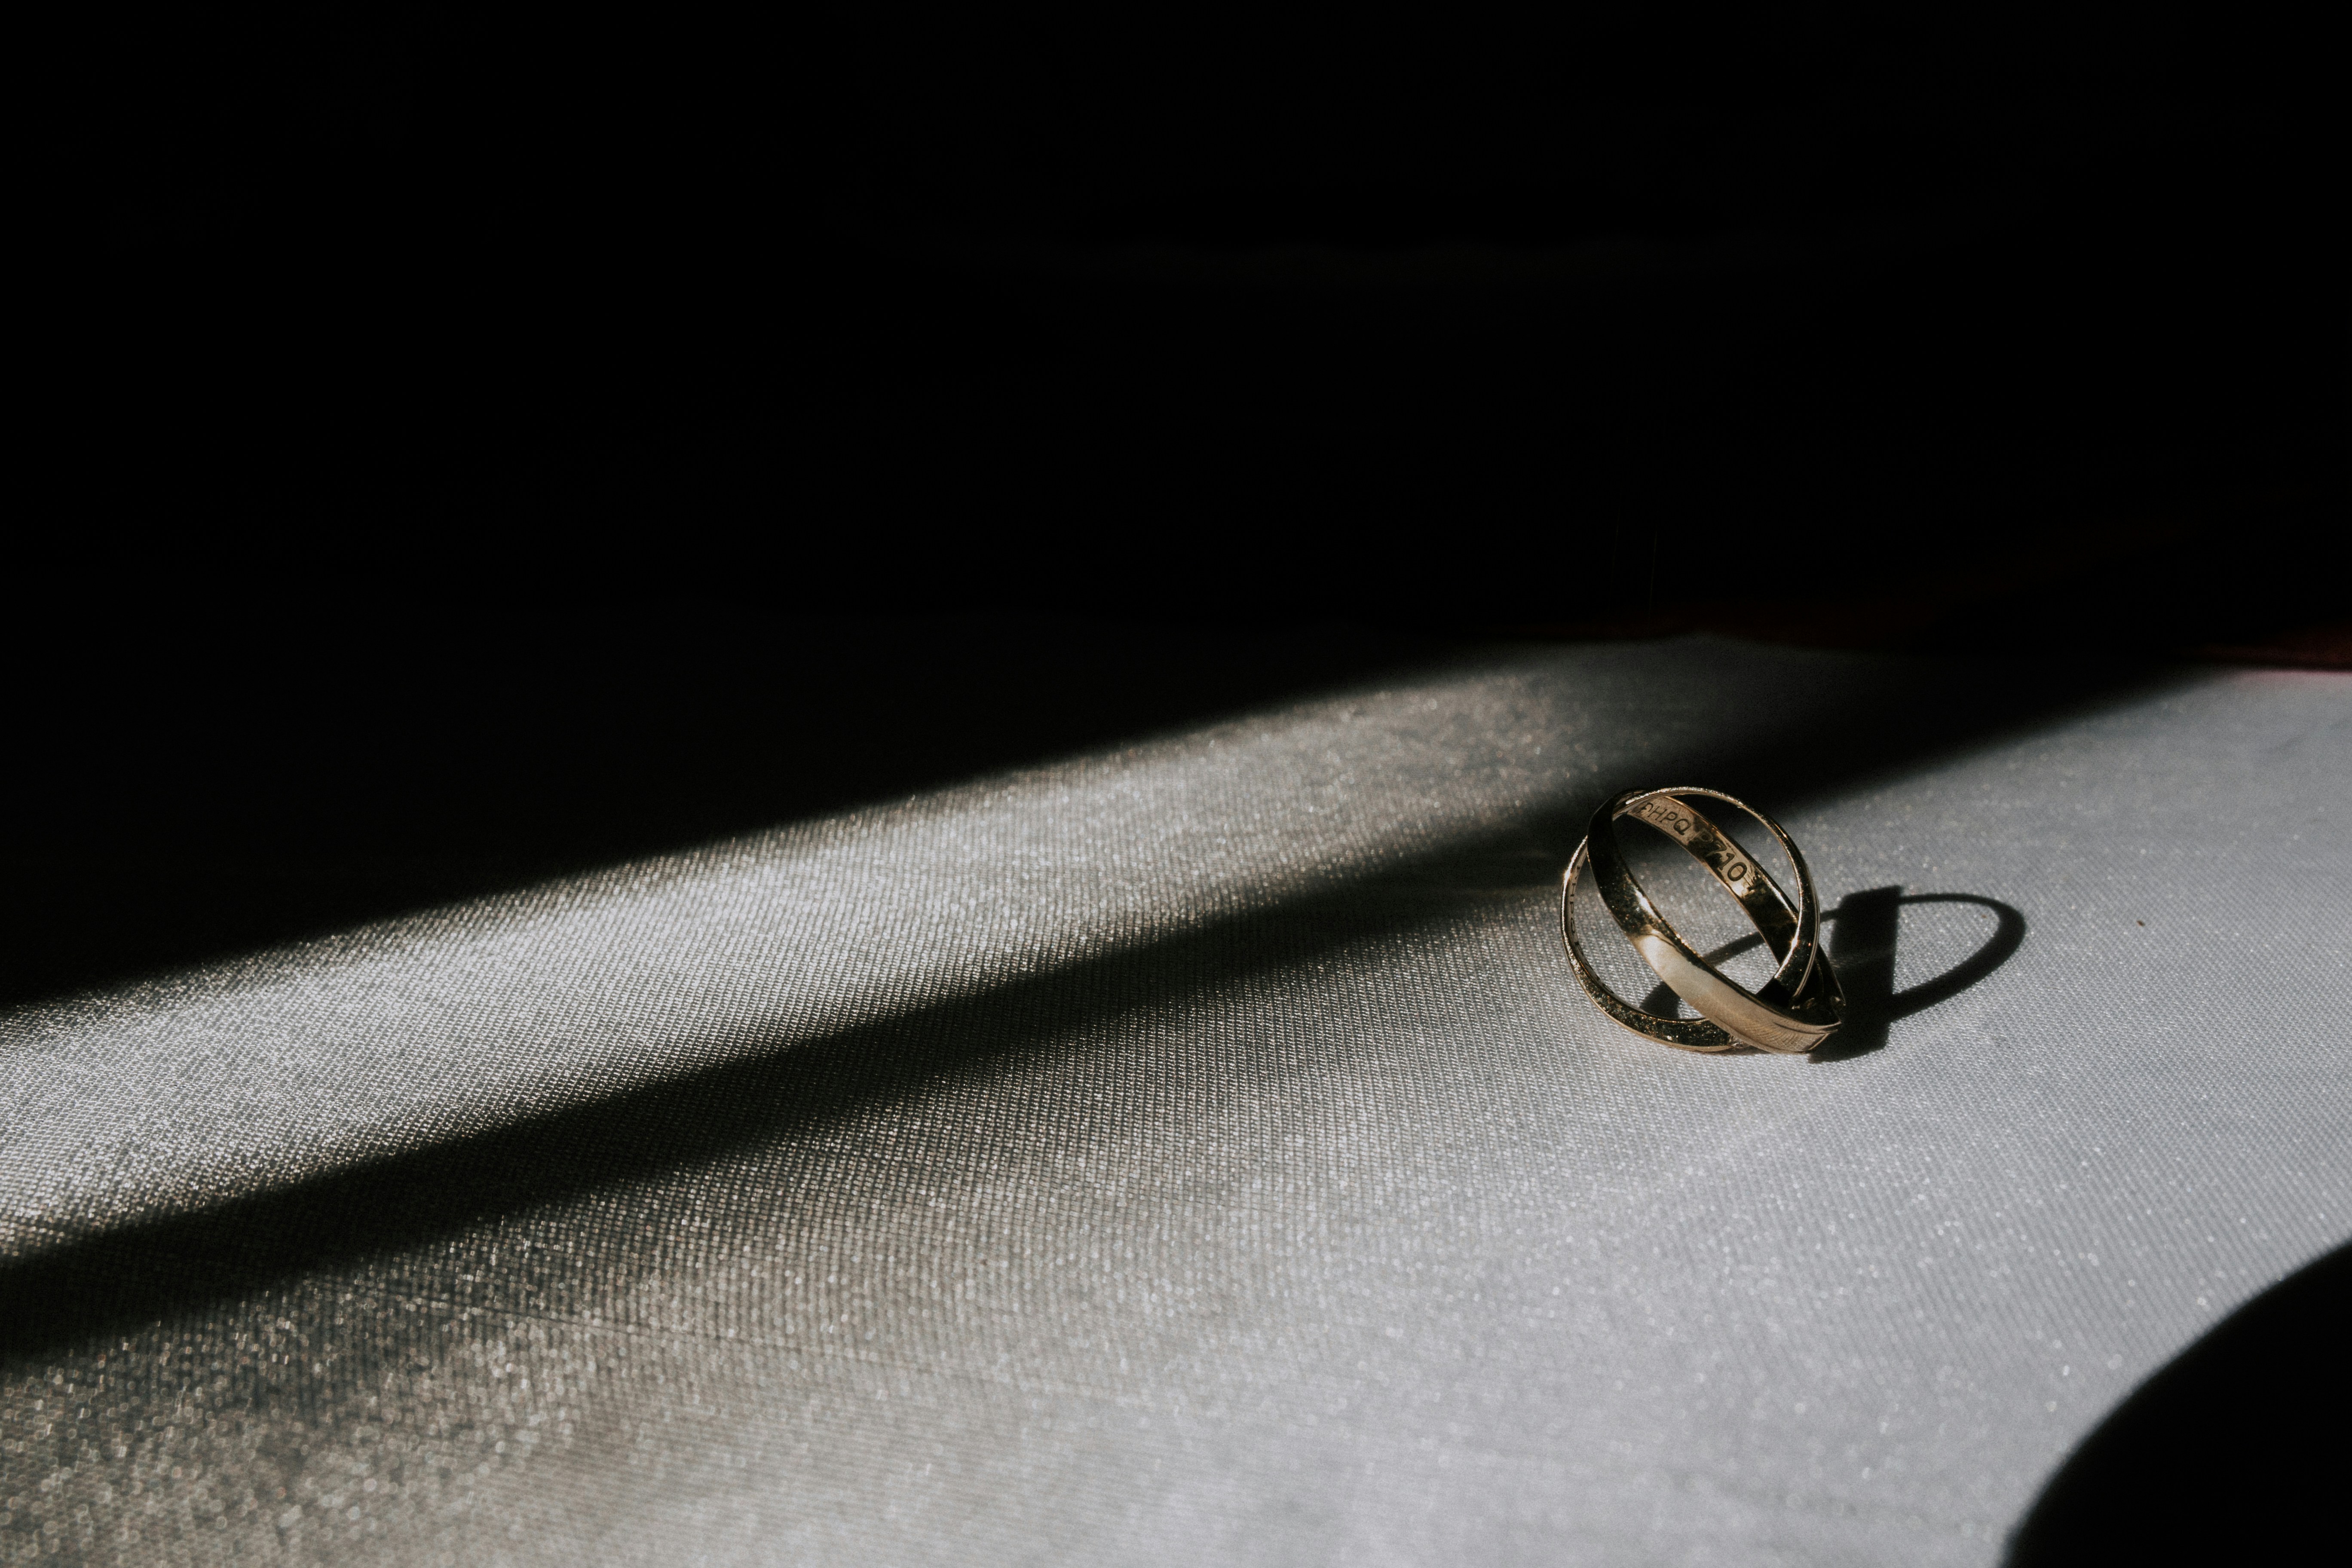 silver-colored ring